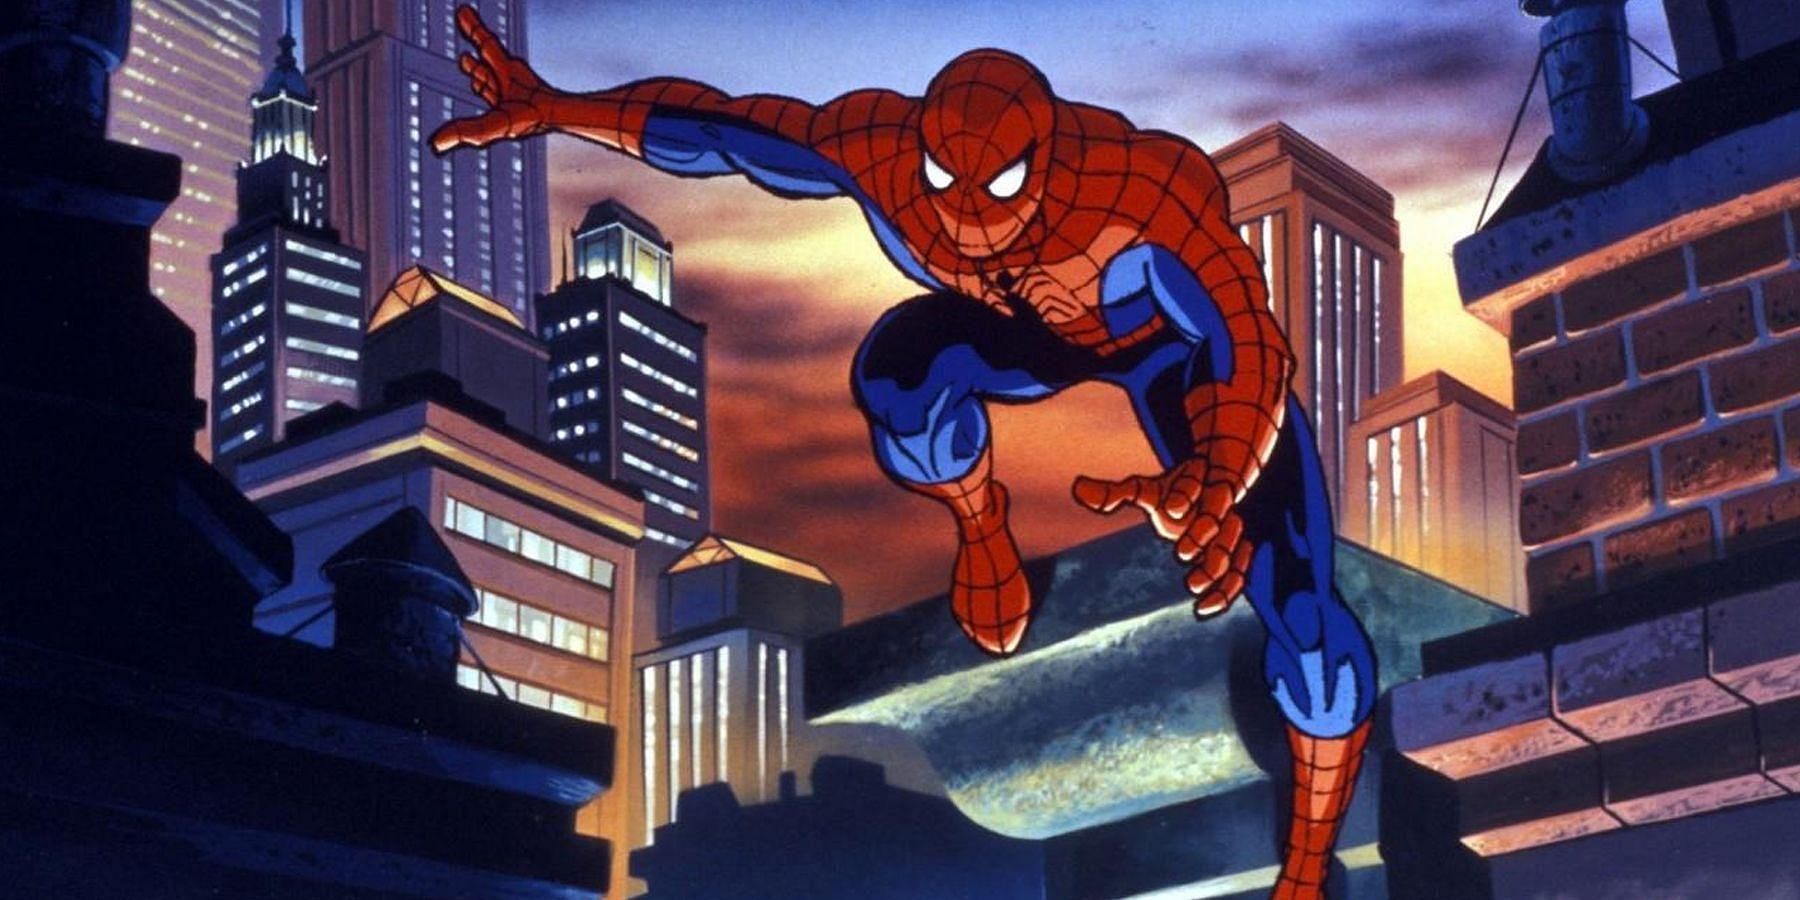 Sony teases at a new Spider-Man animated movie feauturing adult themes (Image via IMDb)